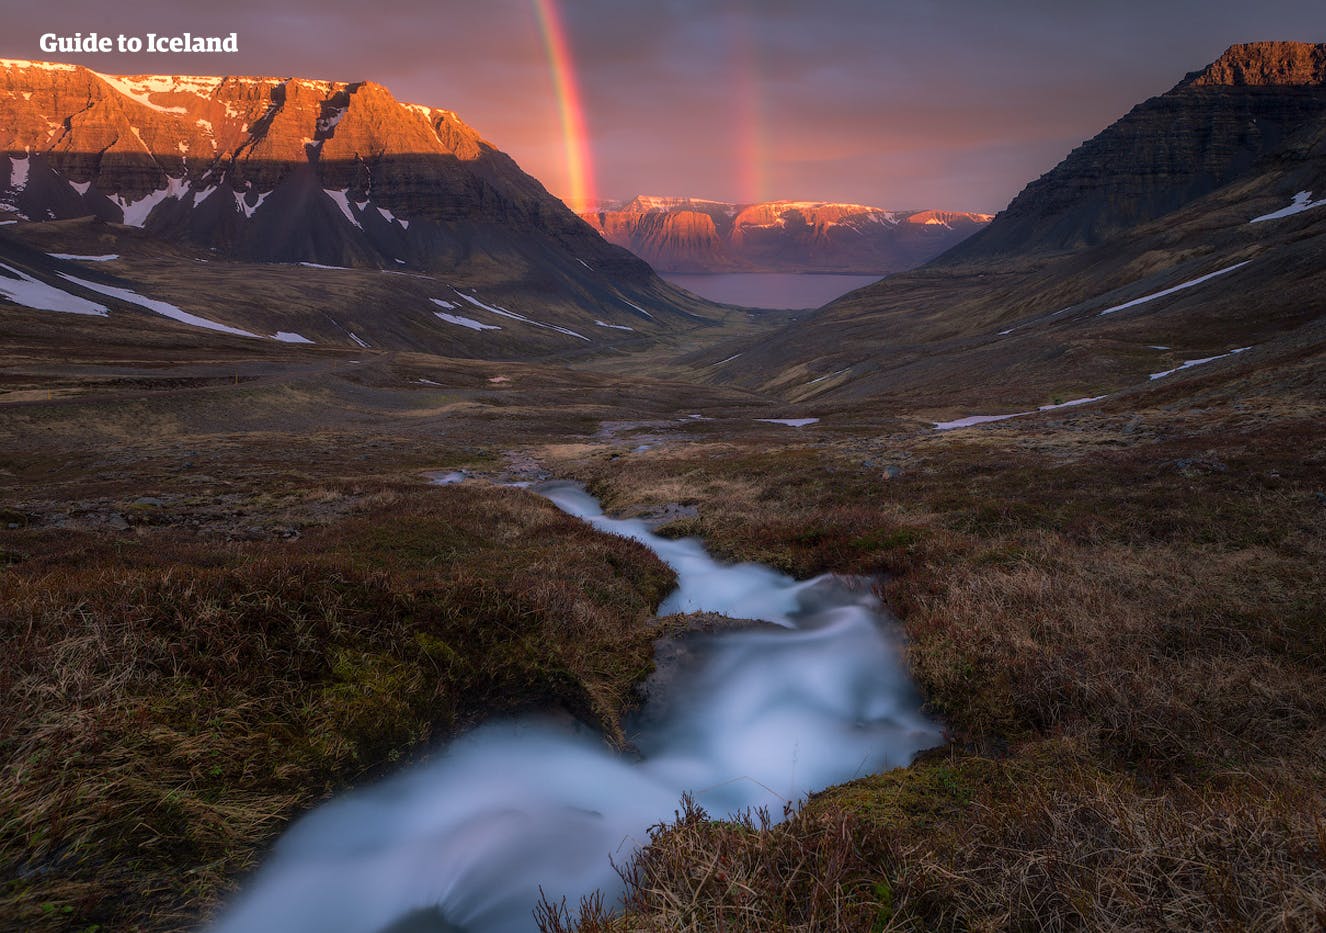 A pair of rainbows arch over landscapes in the Westfjords.